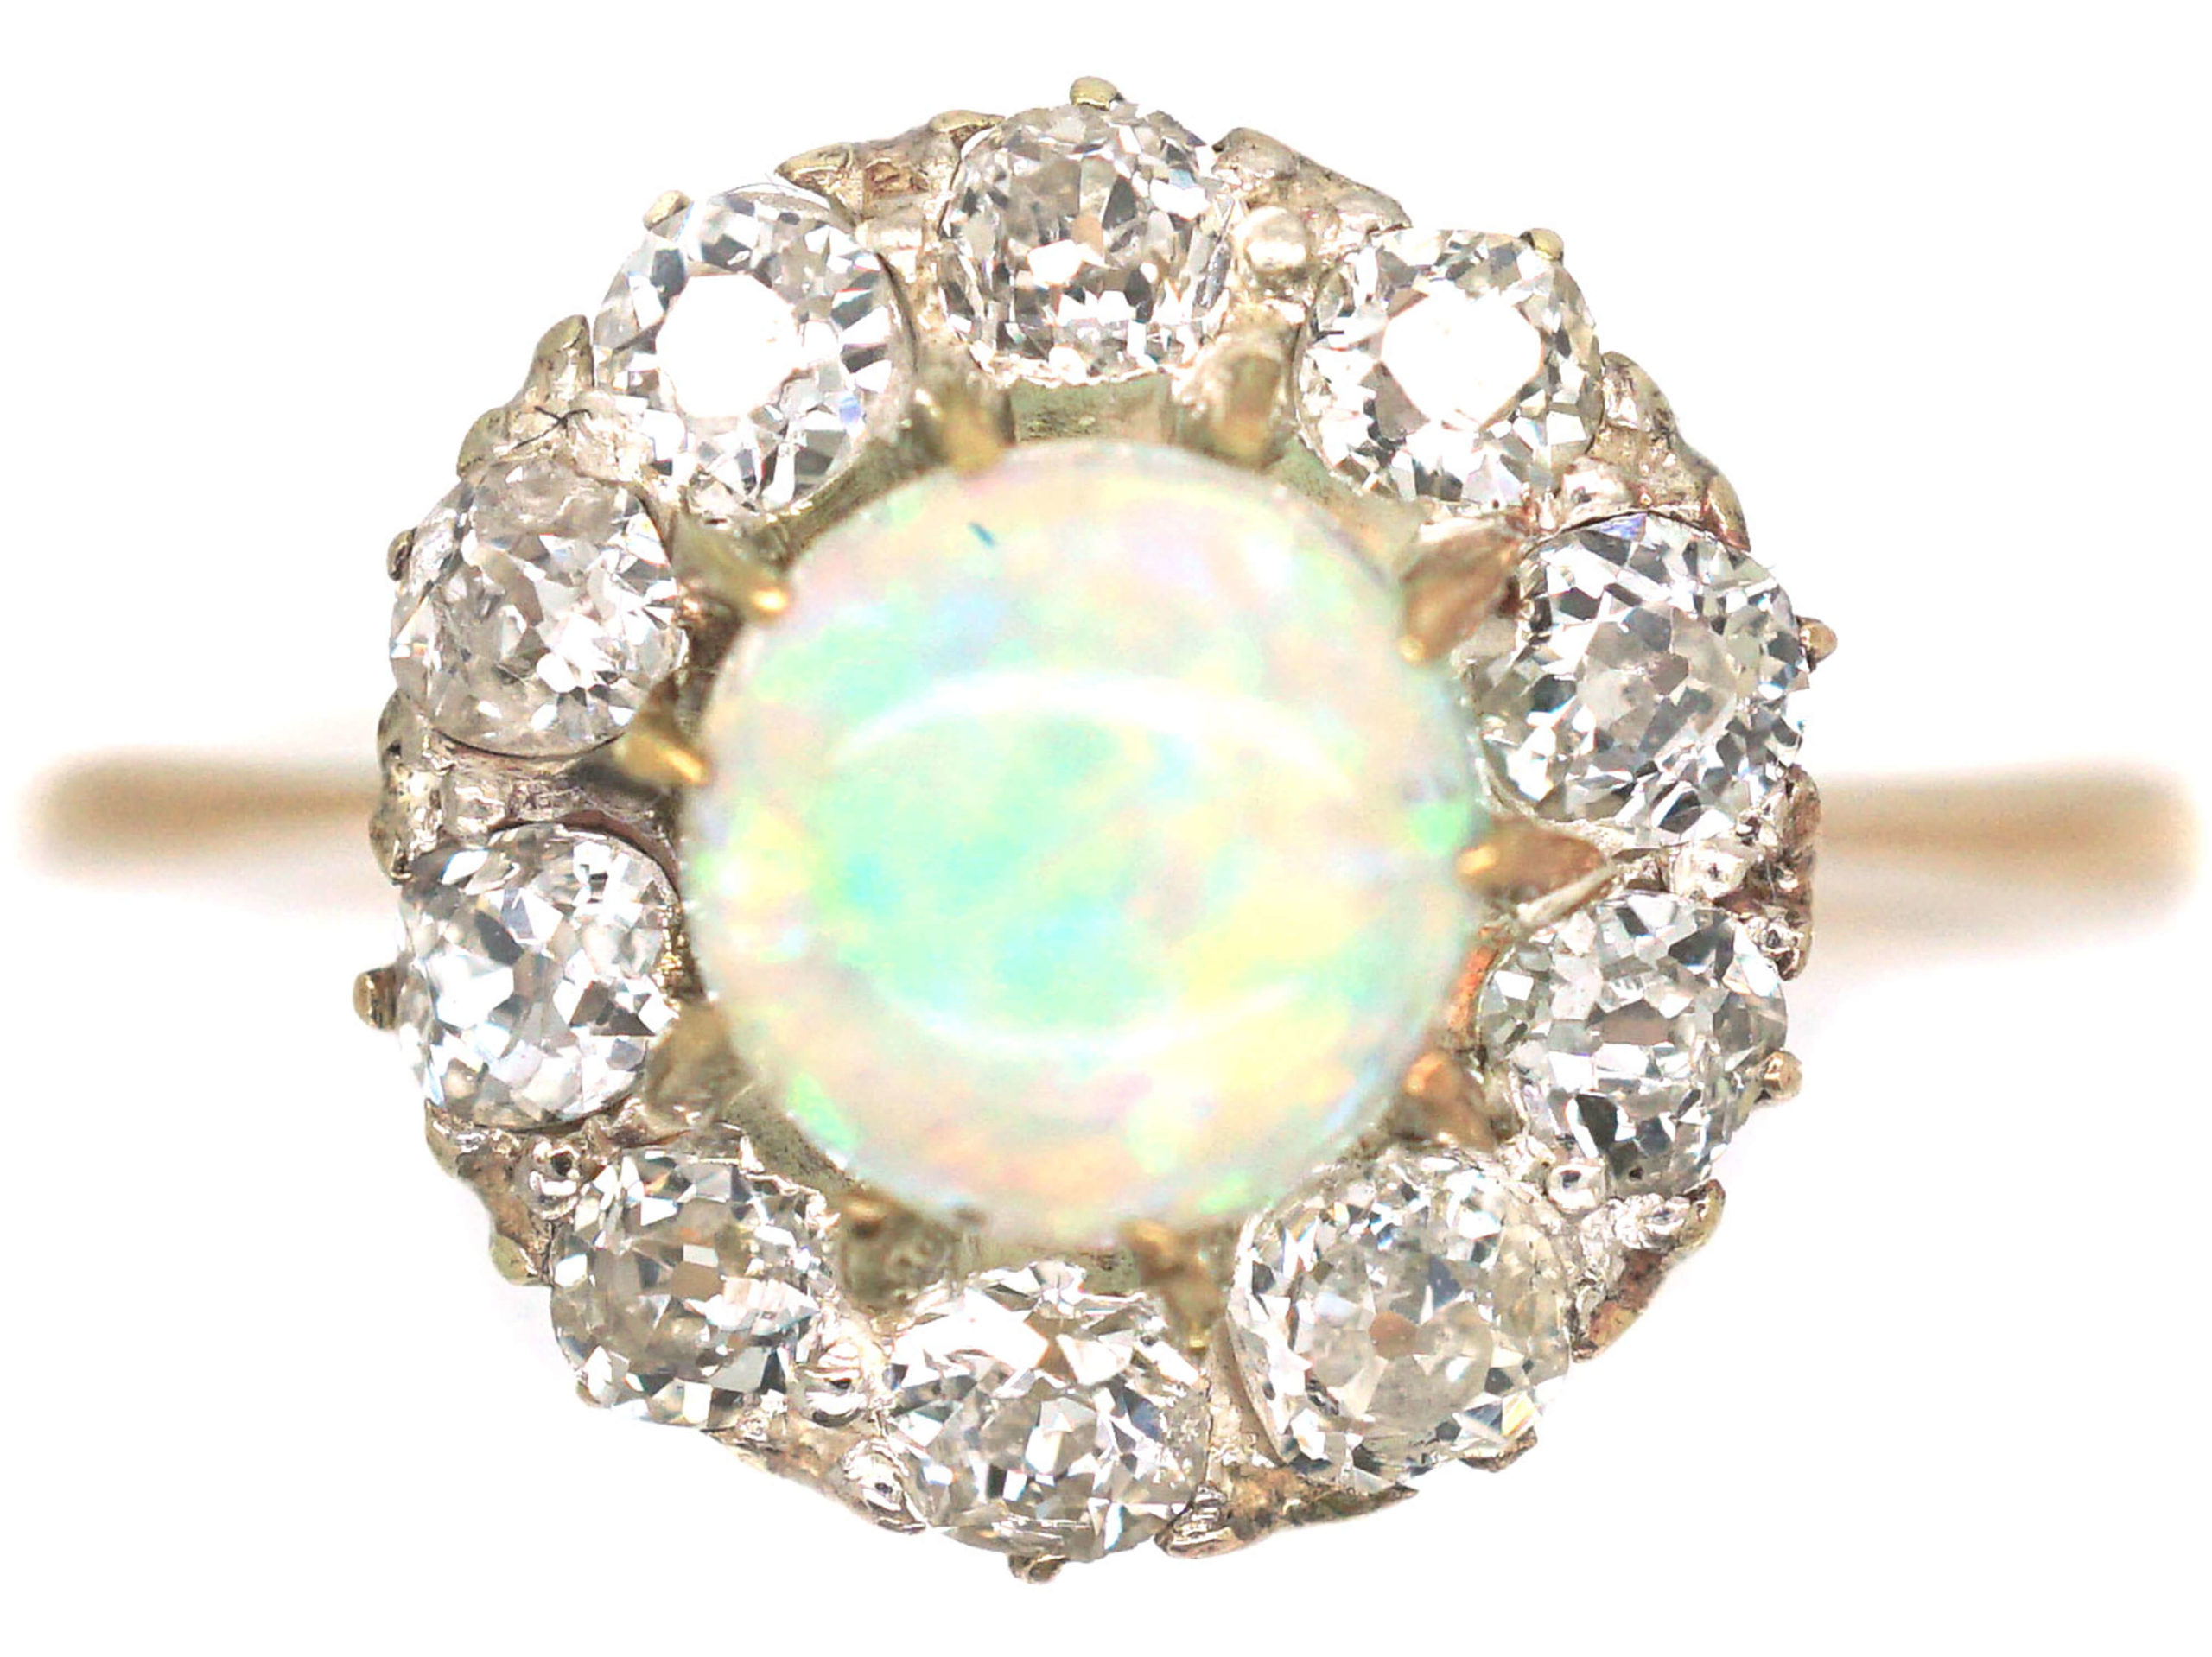 Edwardian 18ct Gold, Opal & Diamond Cluster Ring (158N) | The Antique ...